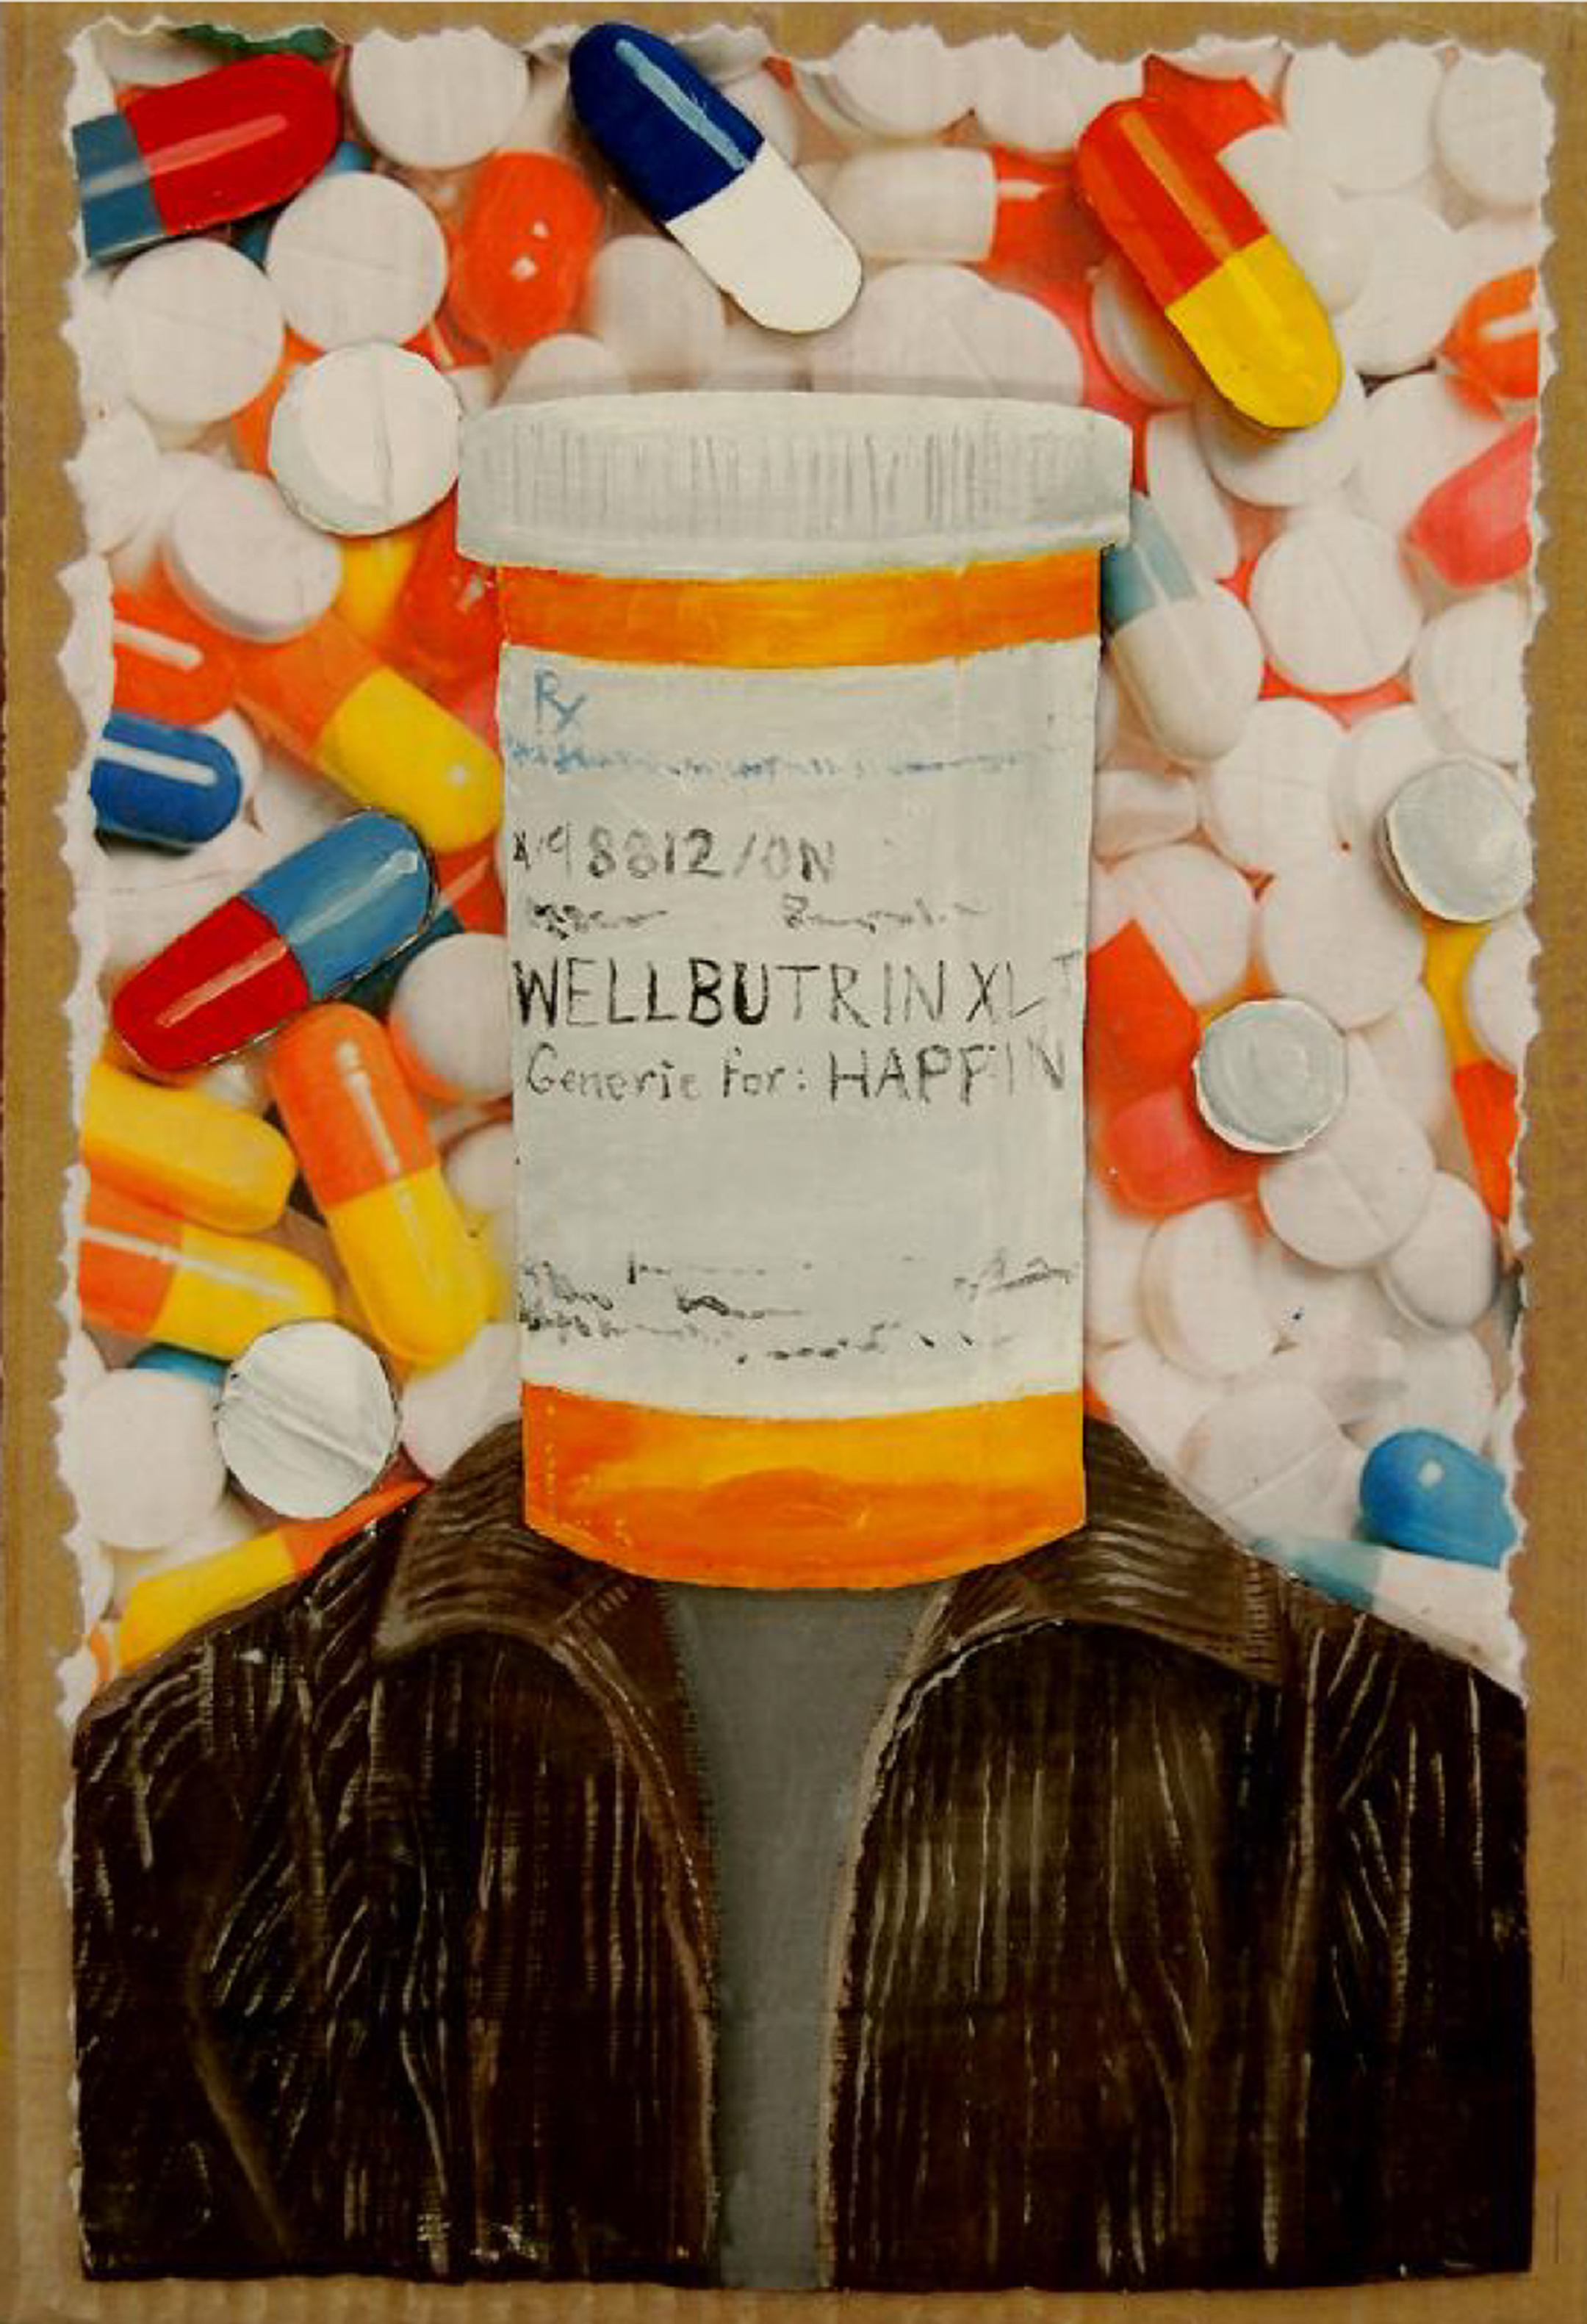 Painting of a person with a giant pill body for a head, against a background of pills